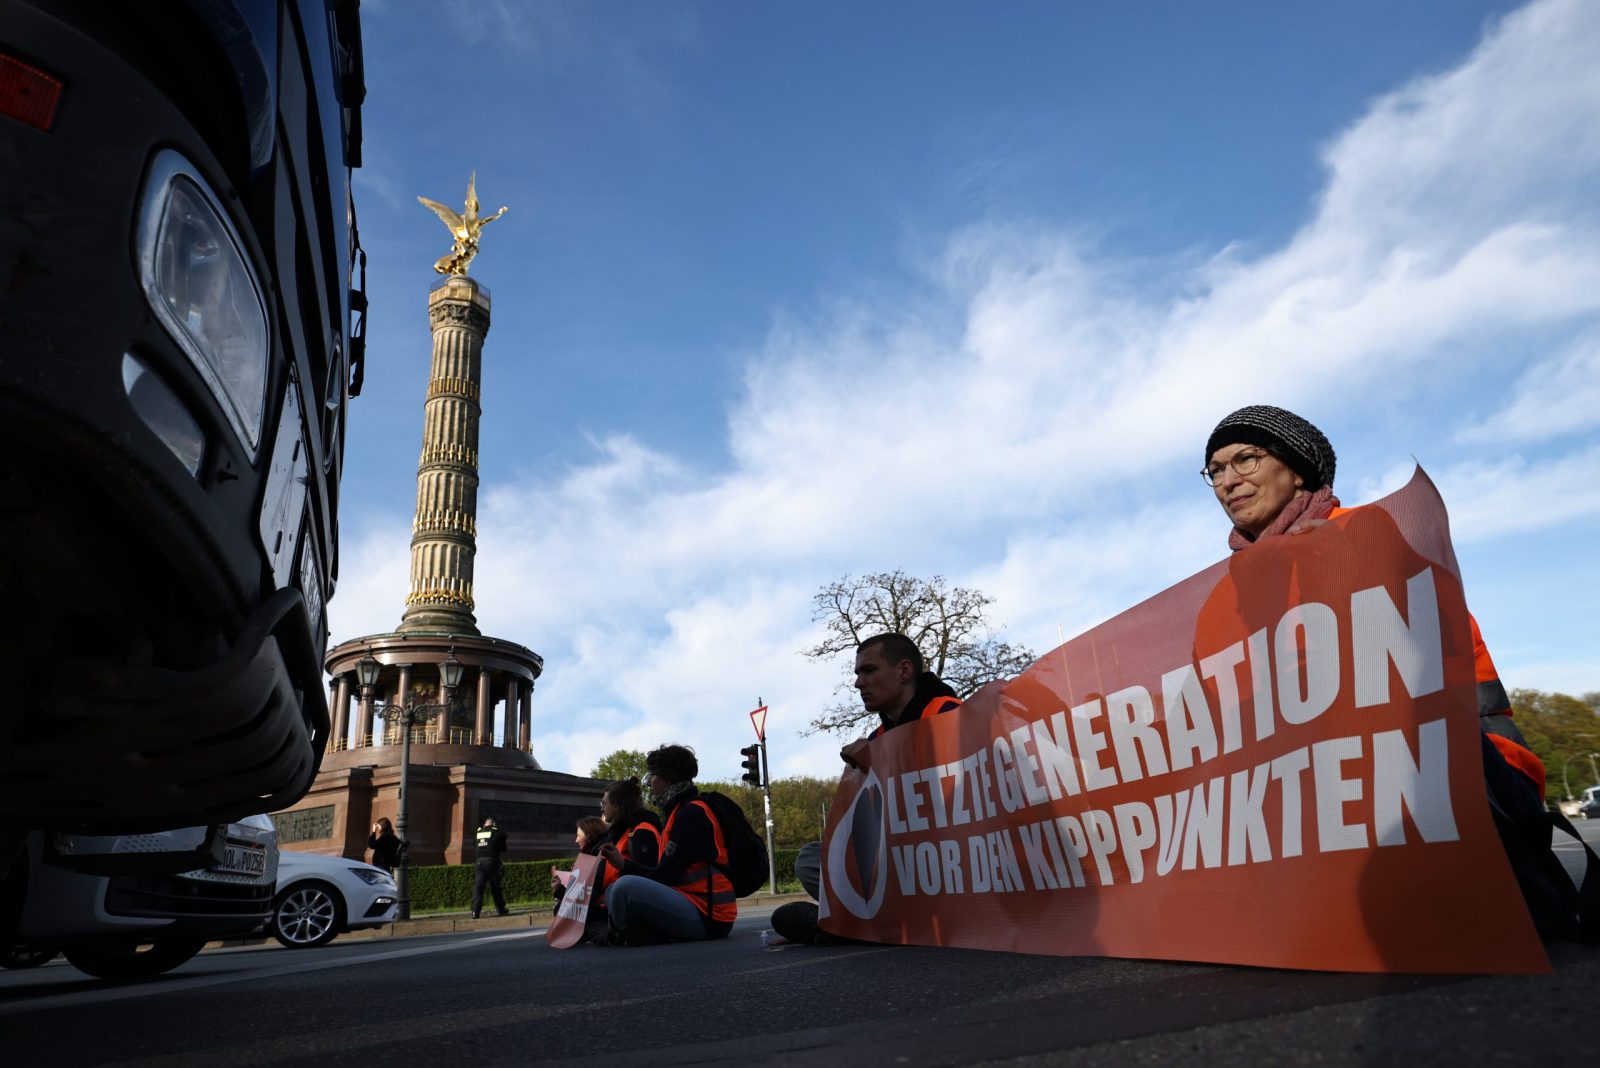 epa10588746 Activists block a street during a climate protest at the victory column in Berlin, Germany, 24 April 2023. The climate protest organization Letzte Generation announced actions of civil disobedience taking place on 24 April 2023 as climate protests in Berlin.  EPA/CLEMENS BILAN